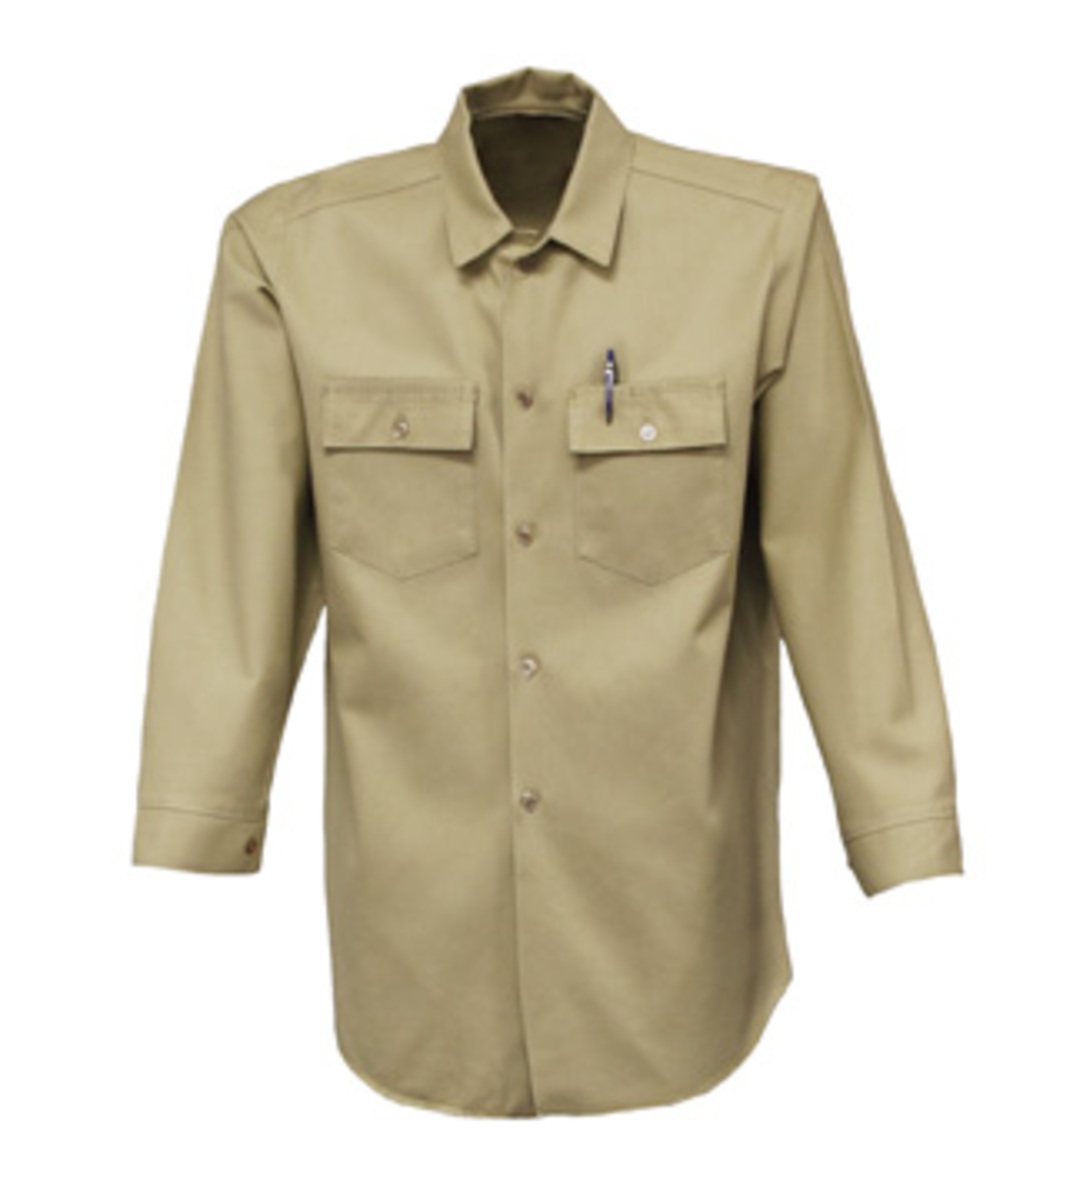 Stanco Safety Products™ Size 3X Tan Indura® UltraSoft® Arc Rated Flame Resistant Shirt With Button Closure